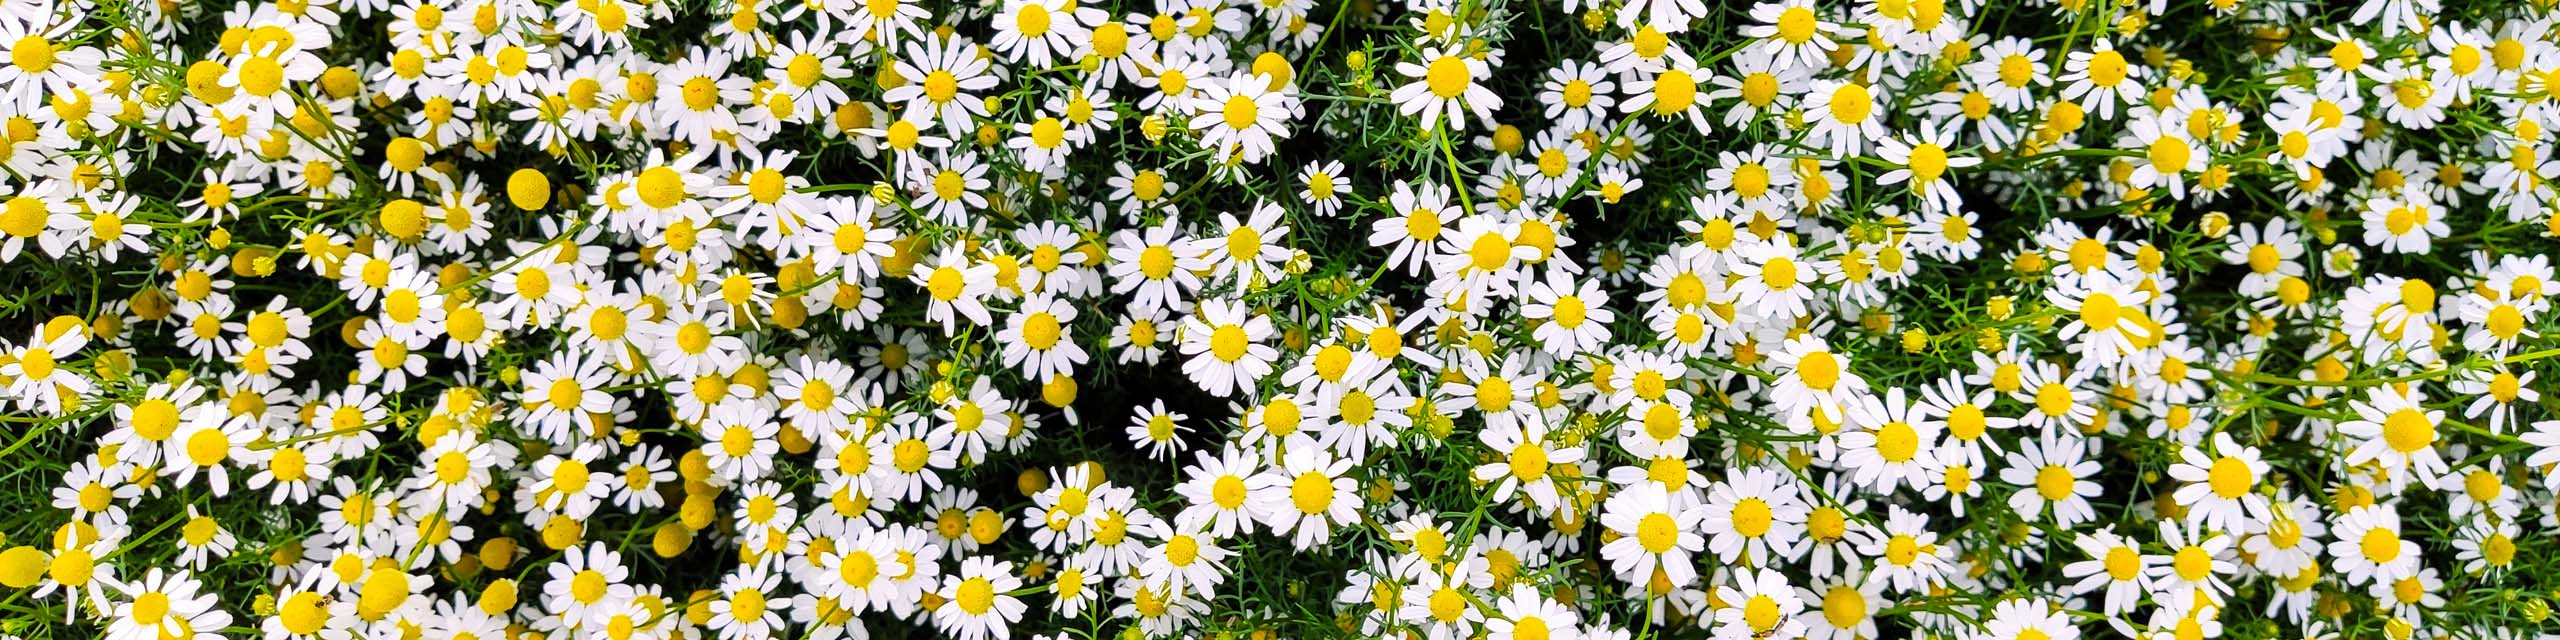 Top down view of a mass planting of chamomile plants with white flowers and yellow centers.